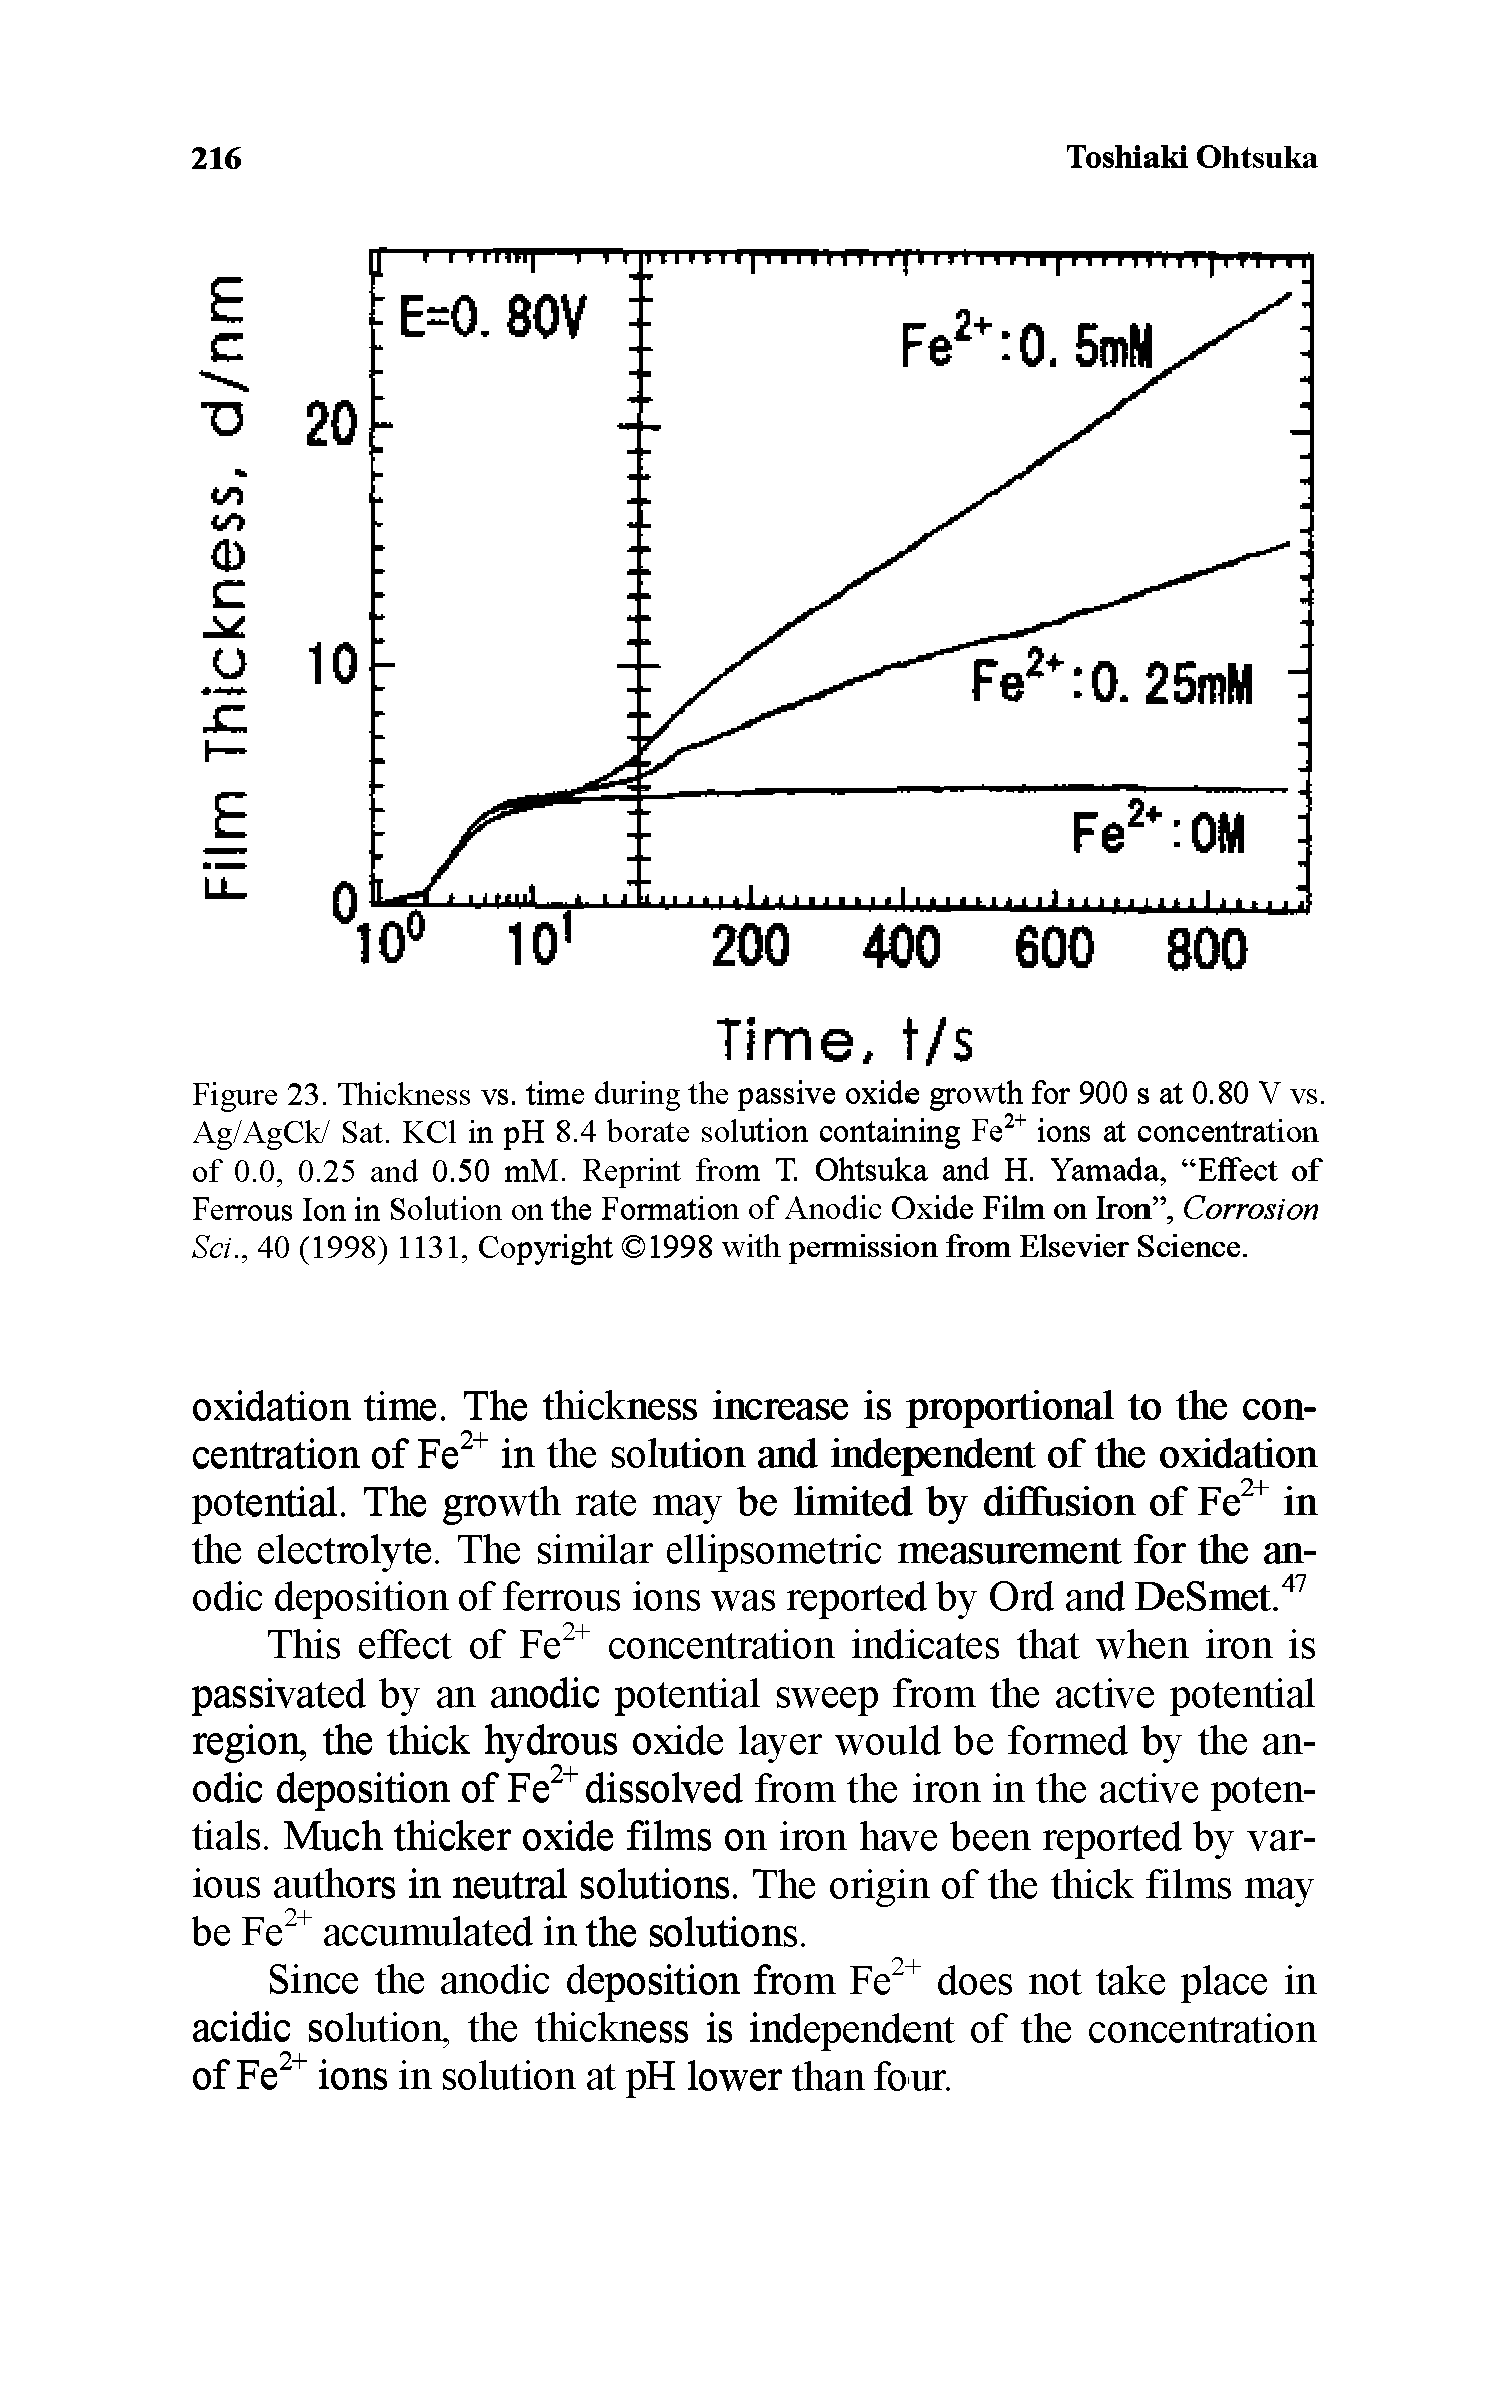 Figure 23. Thickness vs. time during the passive oxide growth for 900 s at 0.80 V vs. Ag/AgCk/ Sat. KCl in pH 8.4 horate solution containing Fe ions at concentration of 0.0, 0.25 and 0.50 mM. Reprint from T. Ohtsuka and H. Yamada, Effect of Ferrous Ion in Solution on the Formation of Anodic Oxide Film on Iron , Corrosion Sci., 40 (1998) 1131, Copyright 1998 with permission from Elsevier Science.